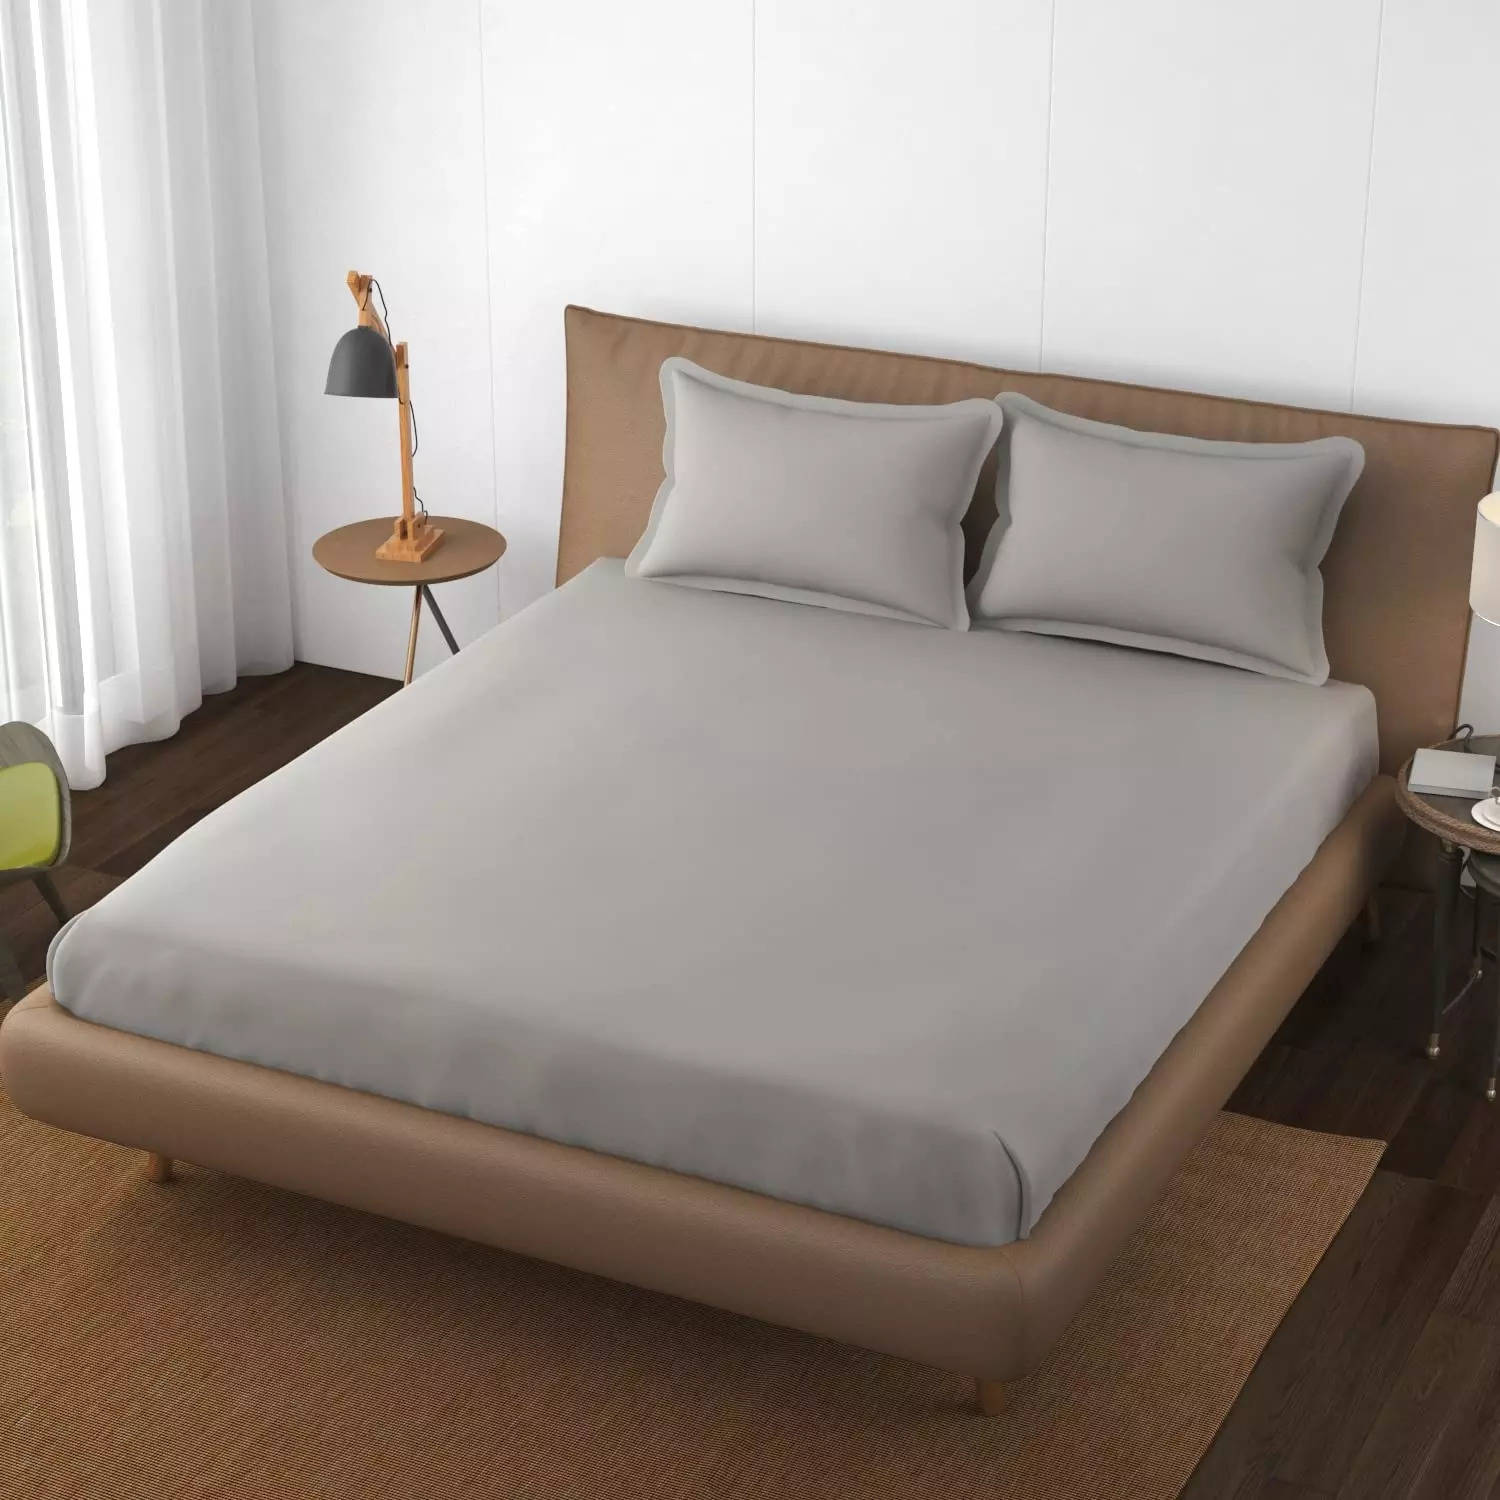 Fitted Bedsheet Supplier Near Me In India, For Home at Rs 400